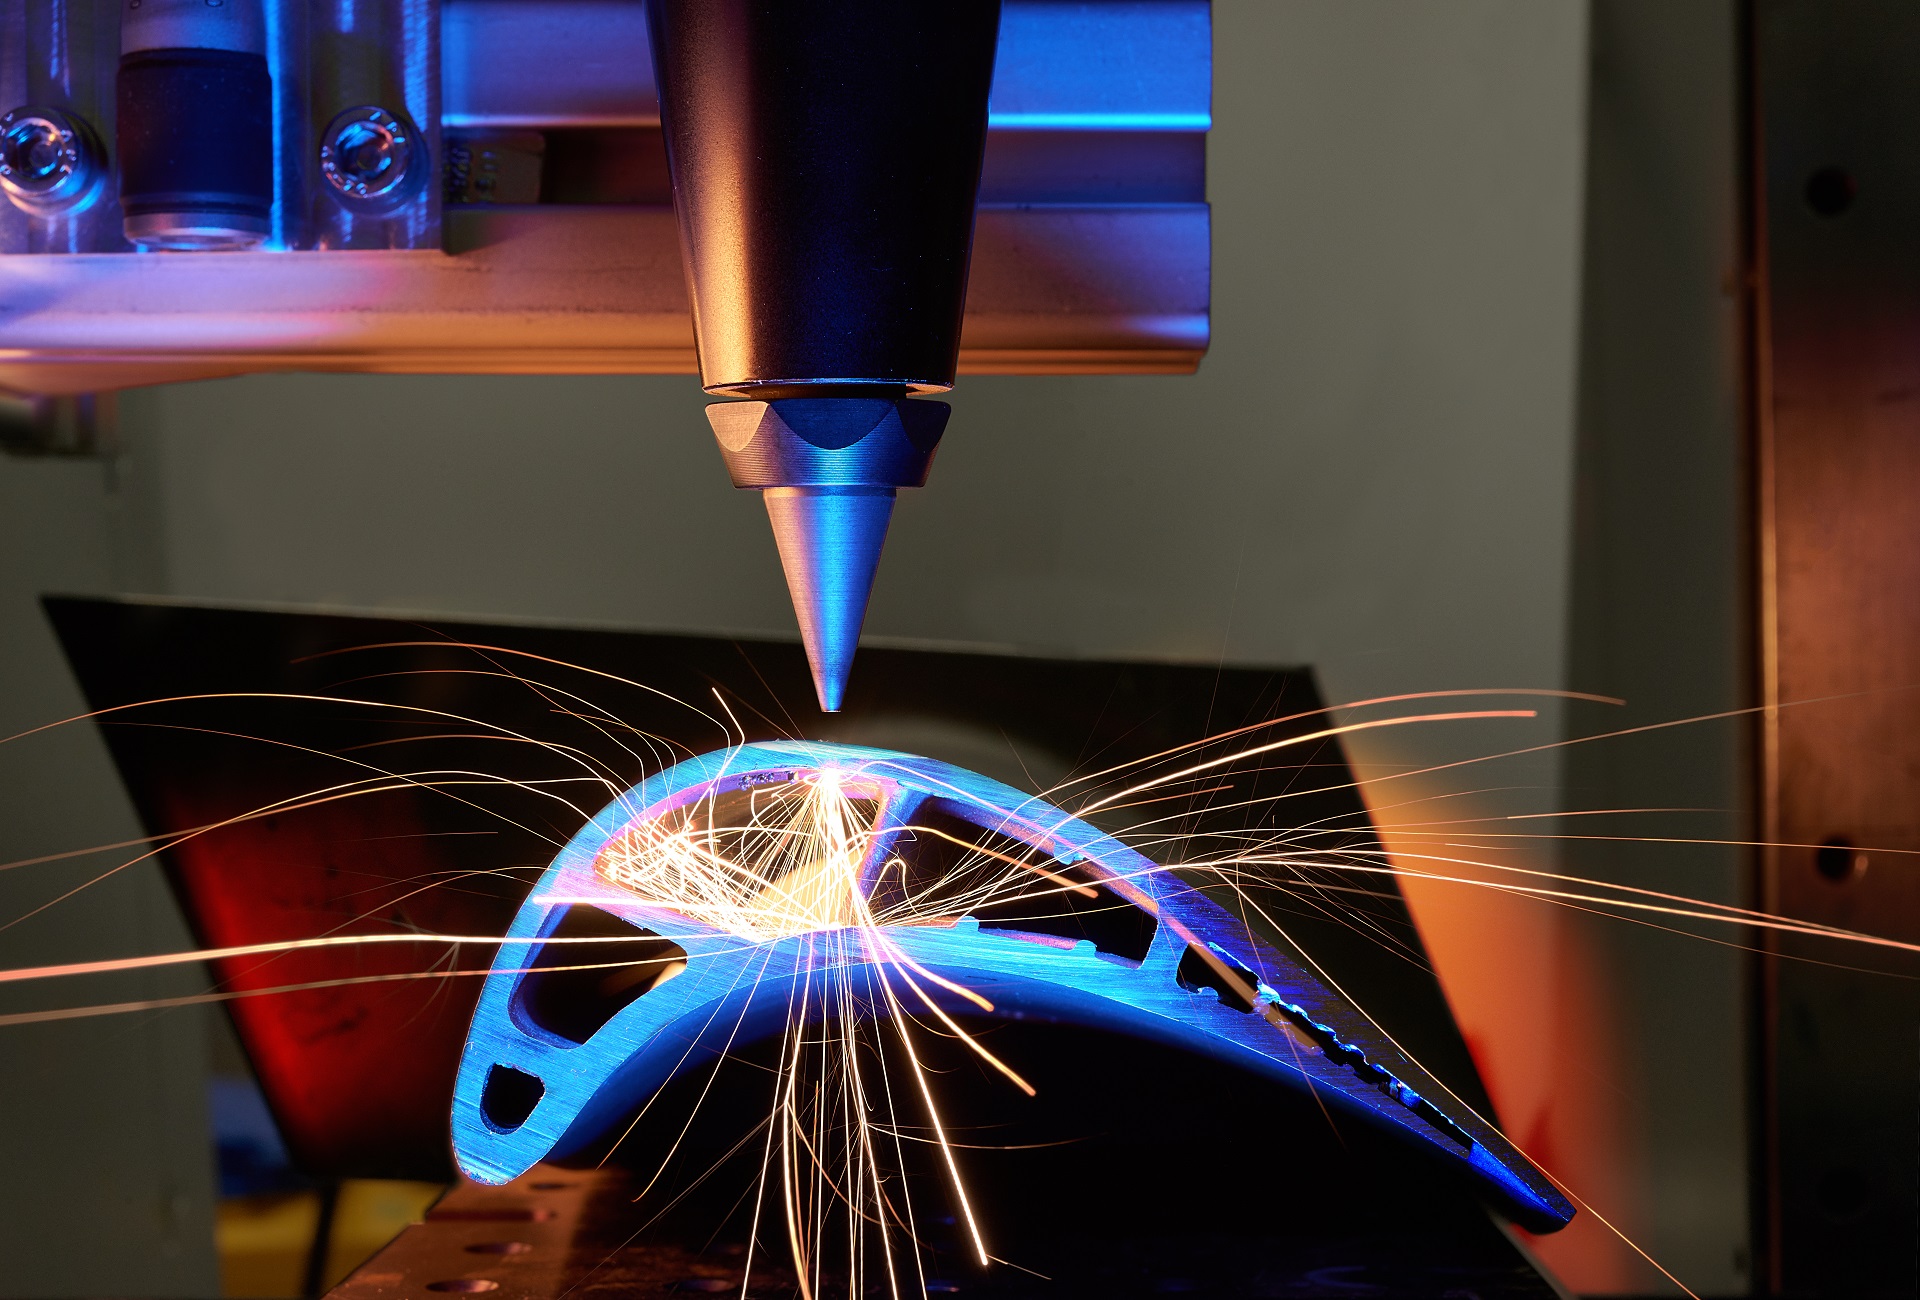 The "Laser-based Manufacturing" technology platform shows SMEs, for example, how the use of laser drilling can optimize their production processes.